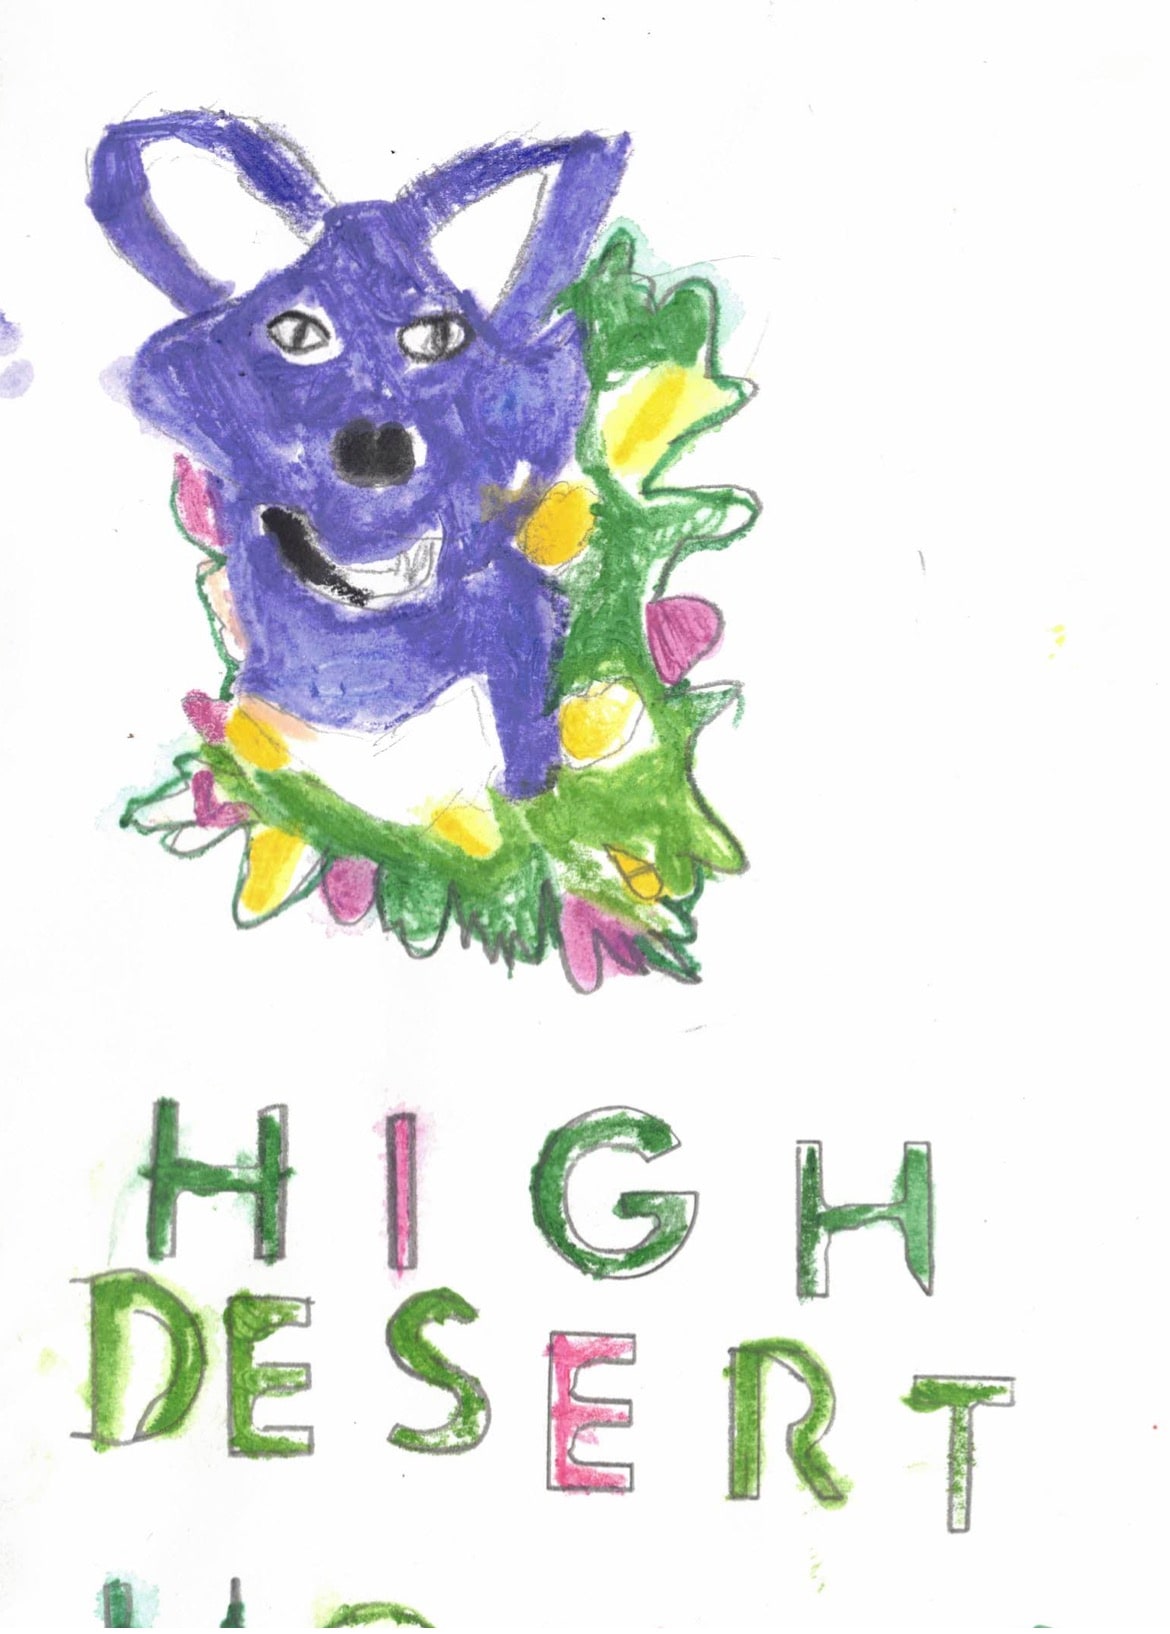 Rosewood+Calder "High Desert" block lettered purple fox bust surrounded by green, yellow plants pastel illustration